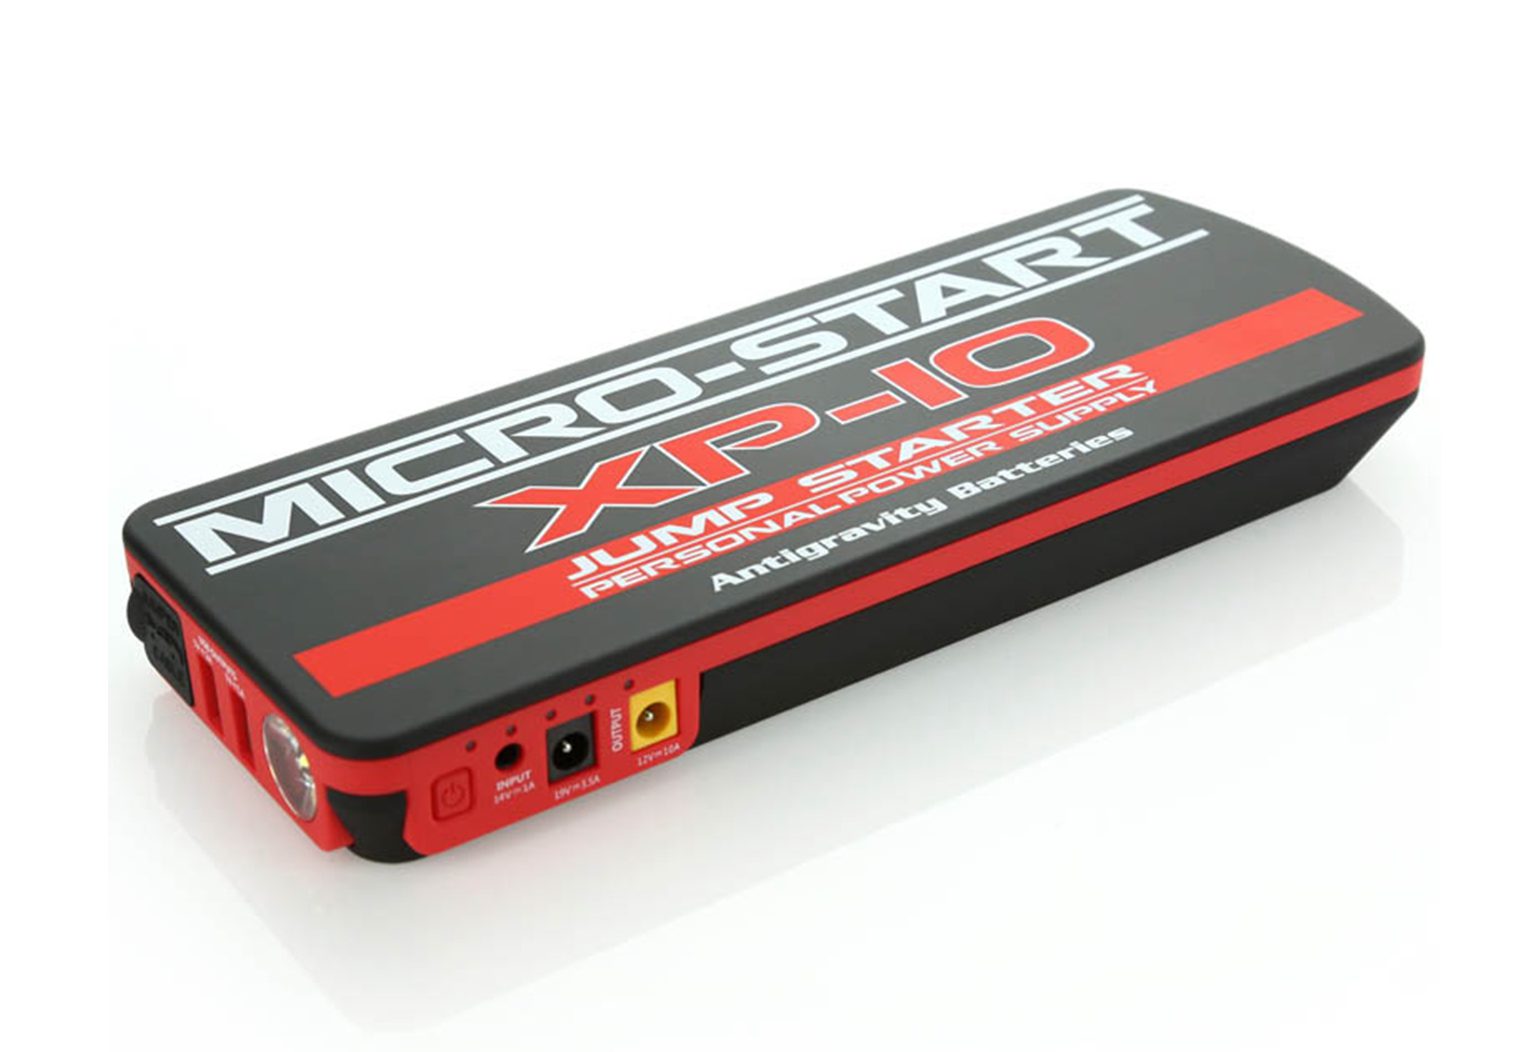 AntiGravity XP-10 angle view of the jump starter